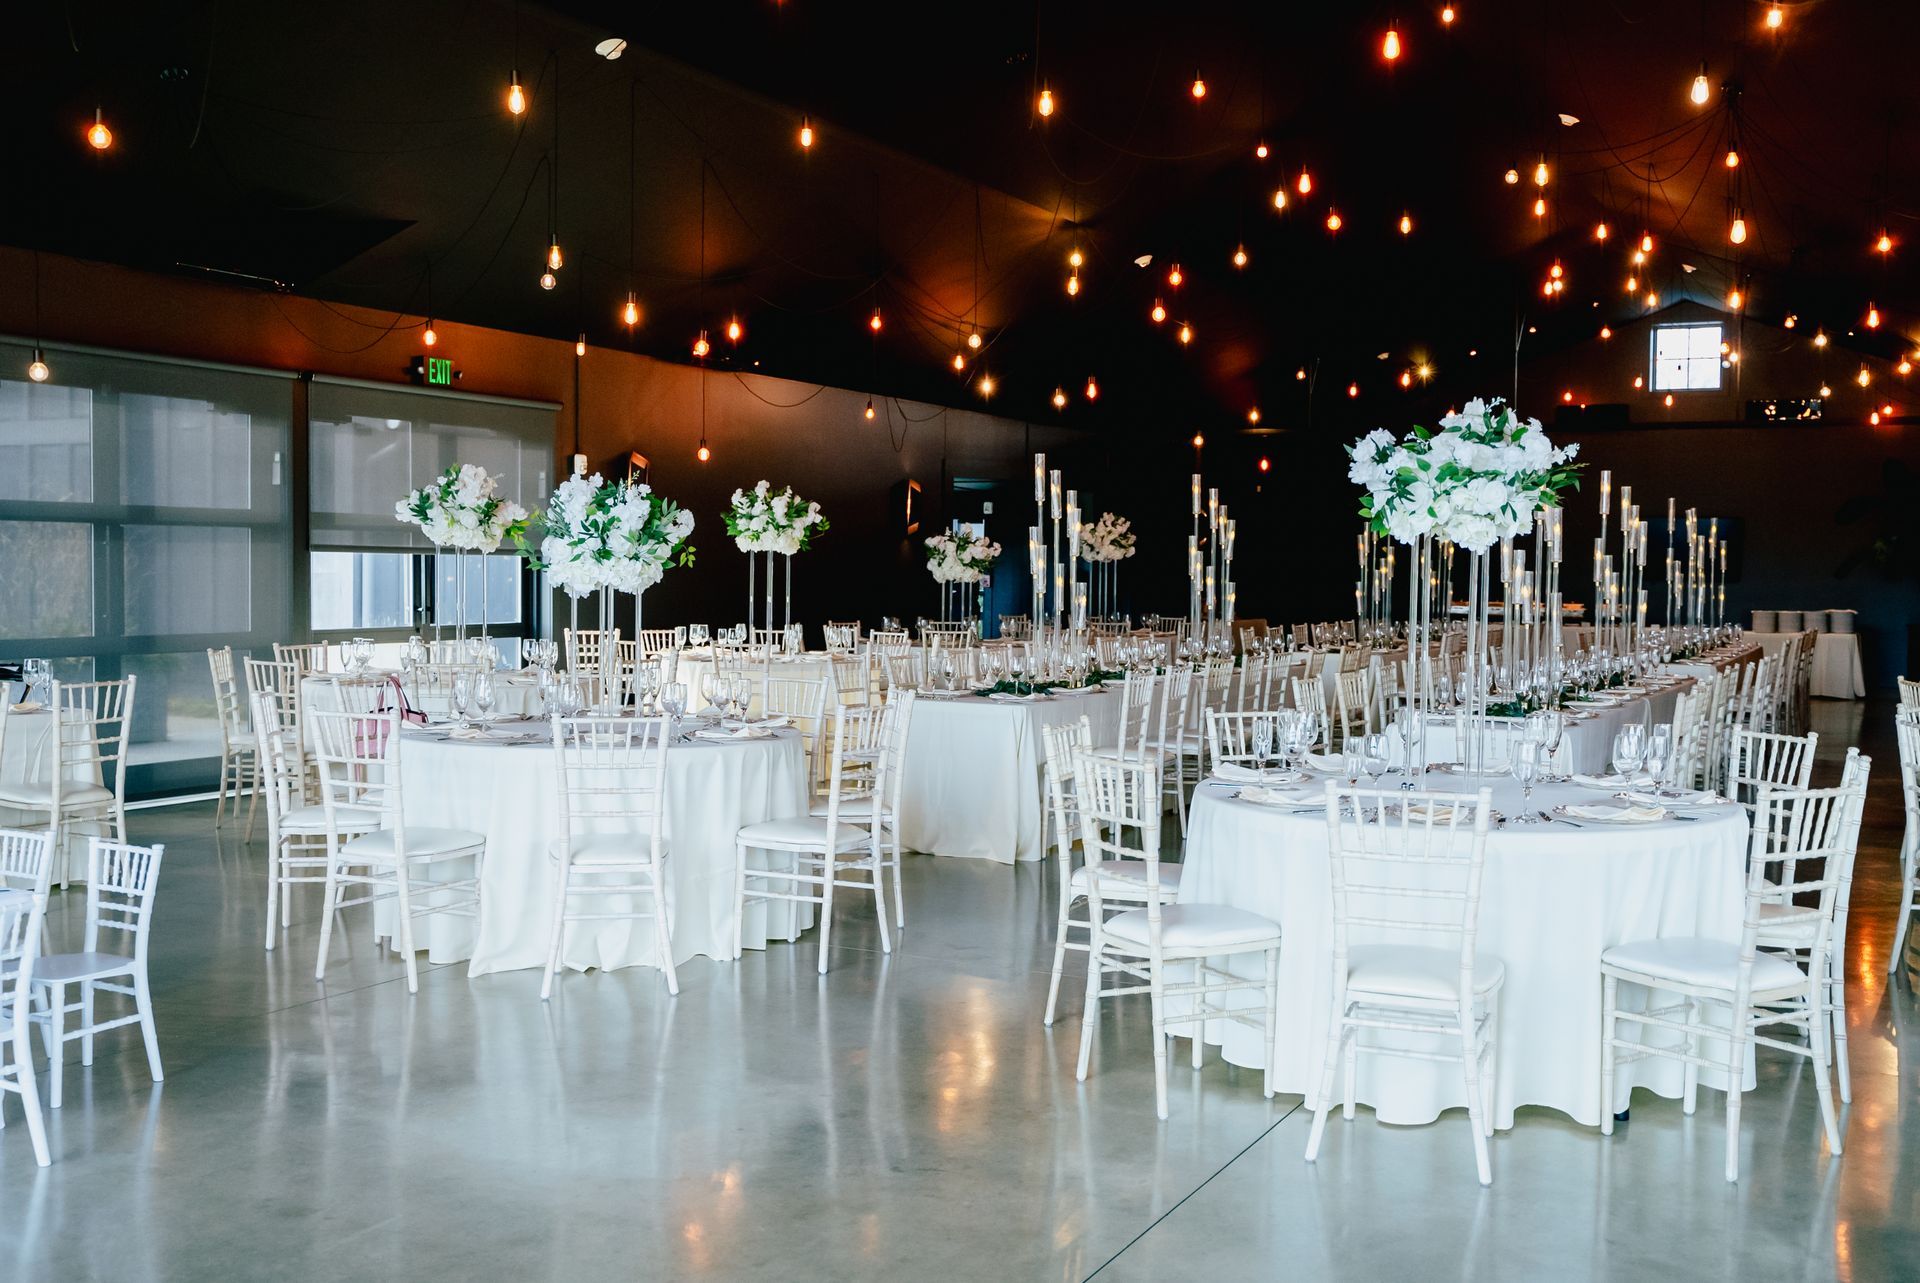 A large room with tables and chairs set up for a wedding reception.